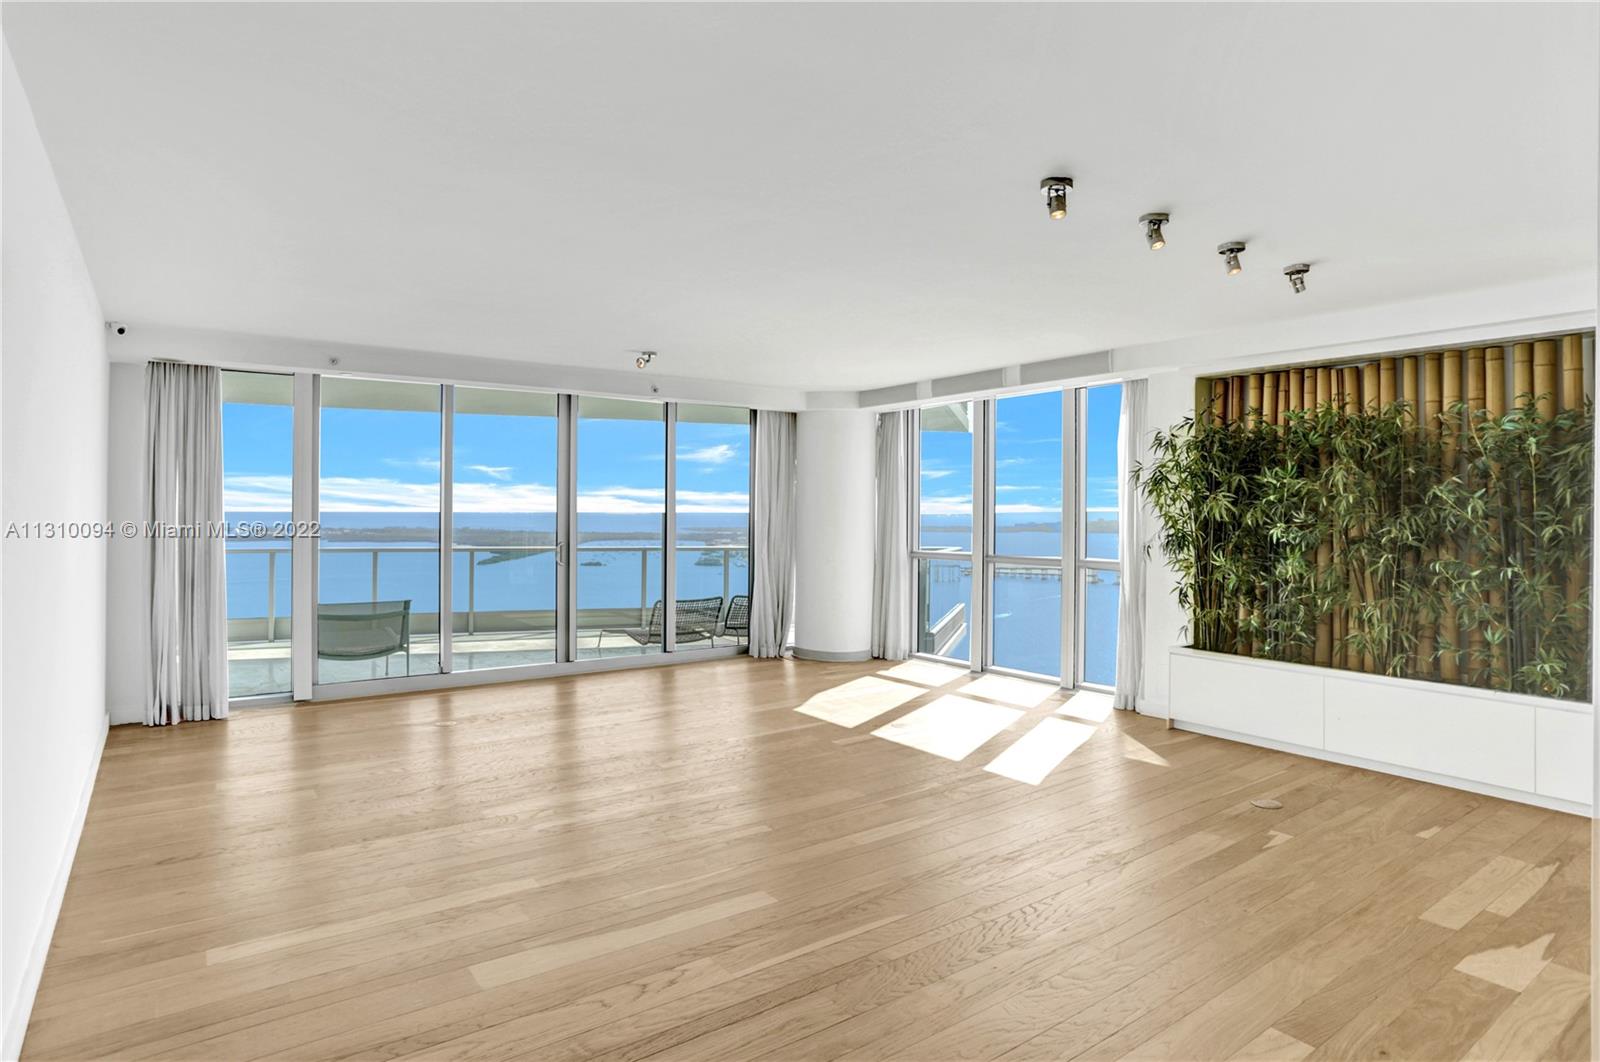 Enjoy breathtaking panoramic views of Biscayne Bay, Miami Beach, Fisher Island and Key Biscayne from this flow-through residence at prestigious Jade Brickell. An expansive floor plan featuring 4 bedrooms and 4.5 bathrooms with smart home technology. Perfect for entertaining, the gourmet kitchen includes top of the line appliances. Jade Brickell is a 5 star luxury building with full time concierge staff. Amenities including: 24 hour front desk, concierge. guest valet, world class health spa, gym resident club room, 2 waterfront pool, party room & much more. Proximity to world-class dining and shopping. Monitored security service with full-time staff including 3 parking spots one on 1st floor.